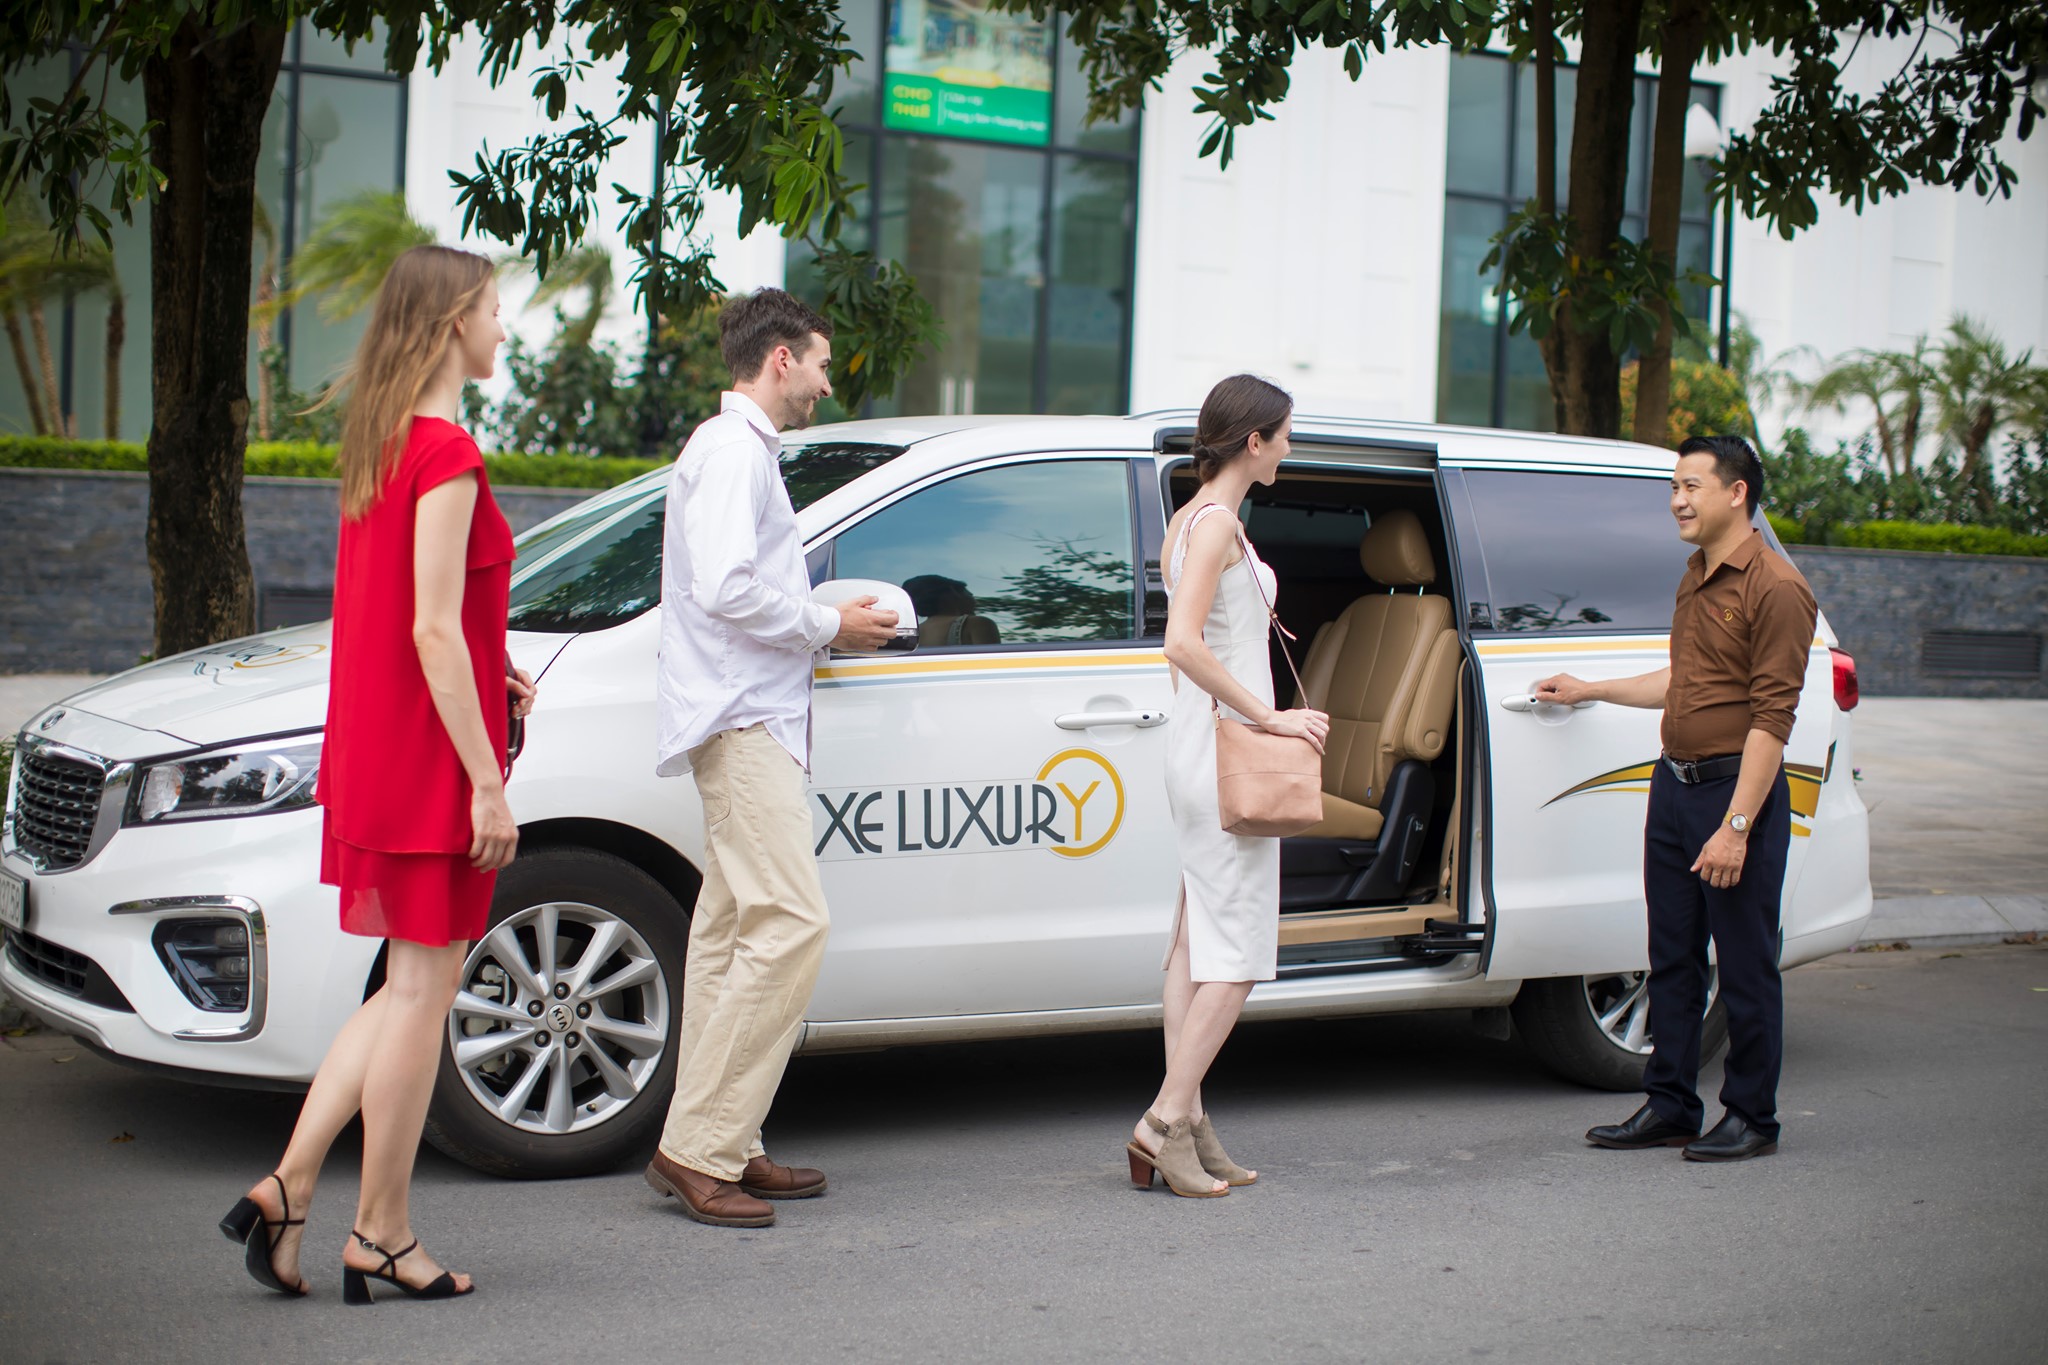 Xe Luxury - Transport from Hanoi to Halong 2